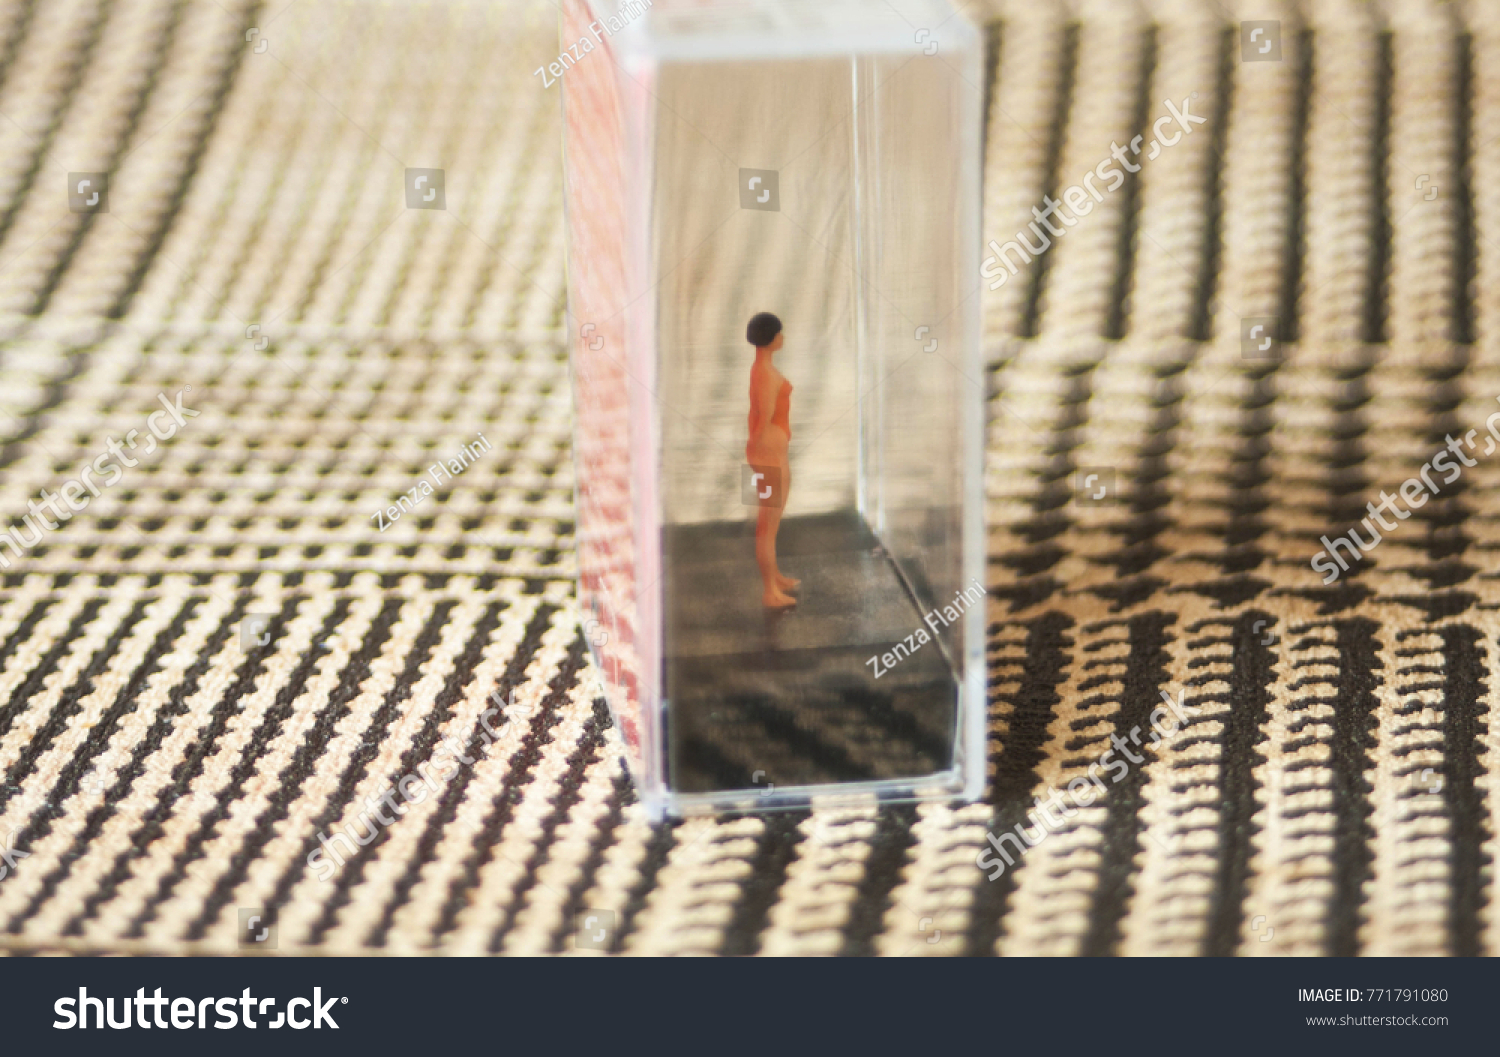 Tiny woman or girl in a glass box. Body issues concept or unrealistic standards of beauty. Depicted in miniature with Instagram filters and soft focus. Eating disorders, body dysmorphia.  #771791080